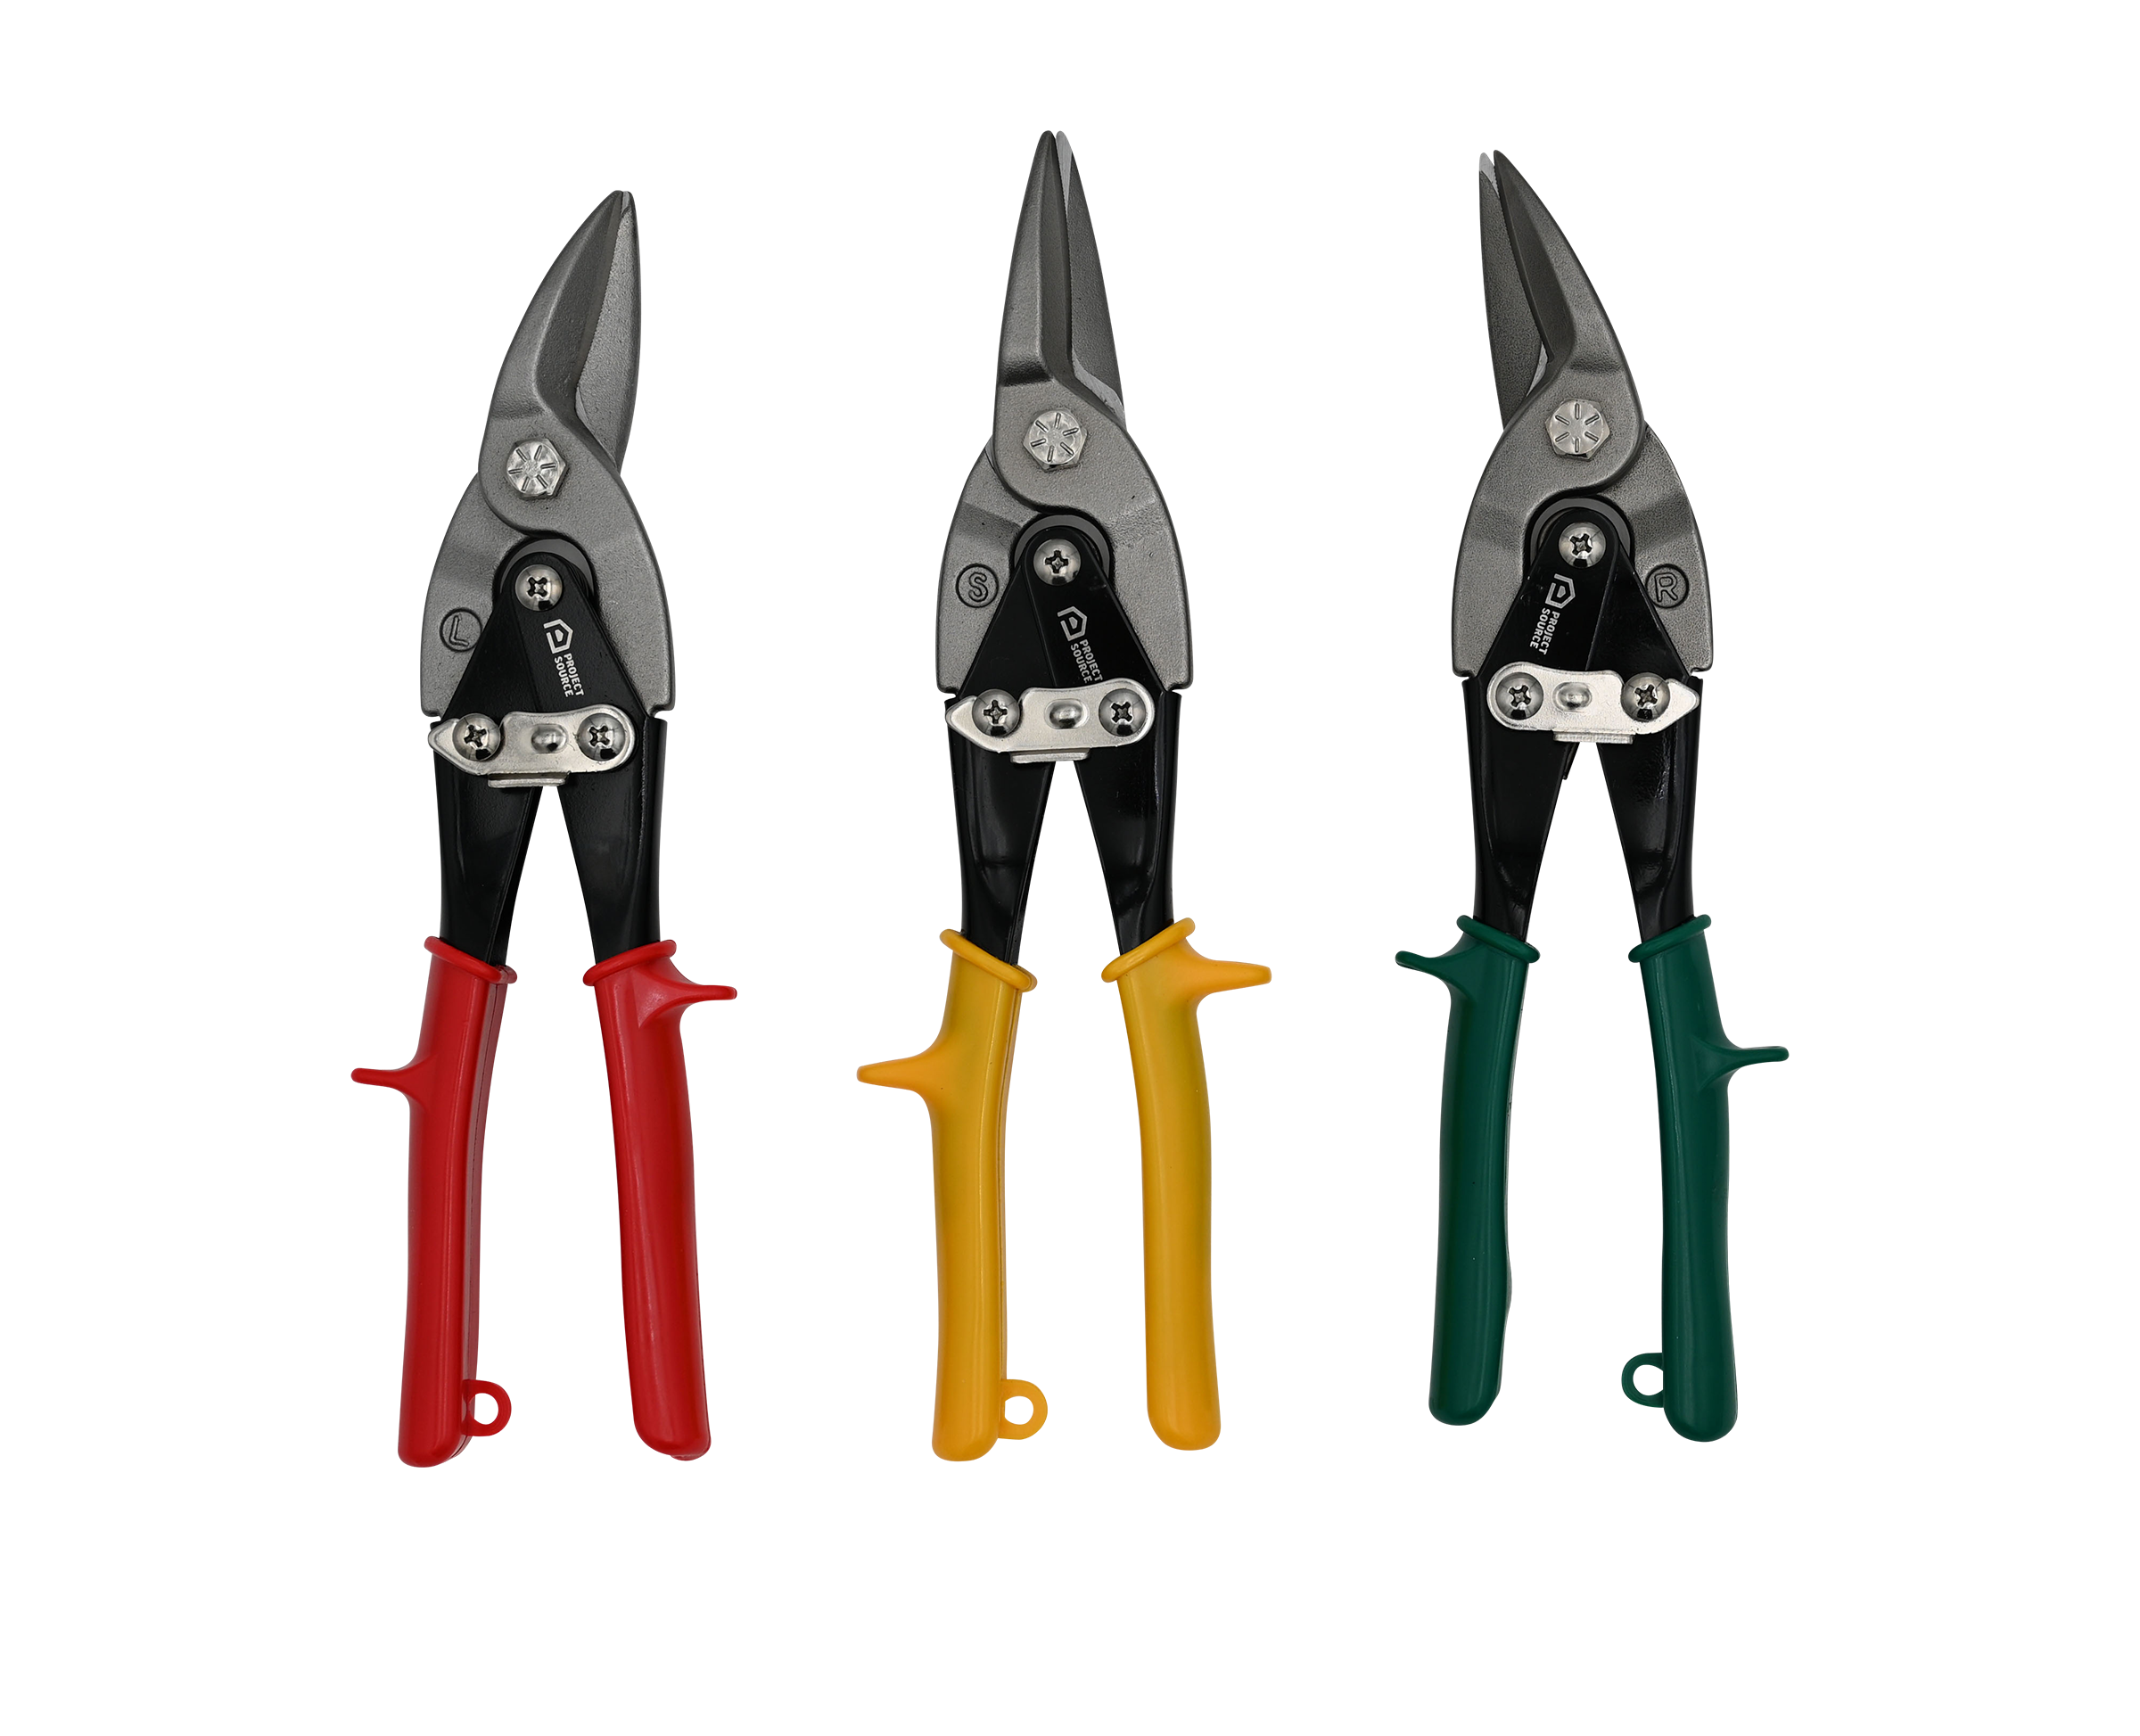 Tin Snips – Nature Stone Brand Products from OCR